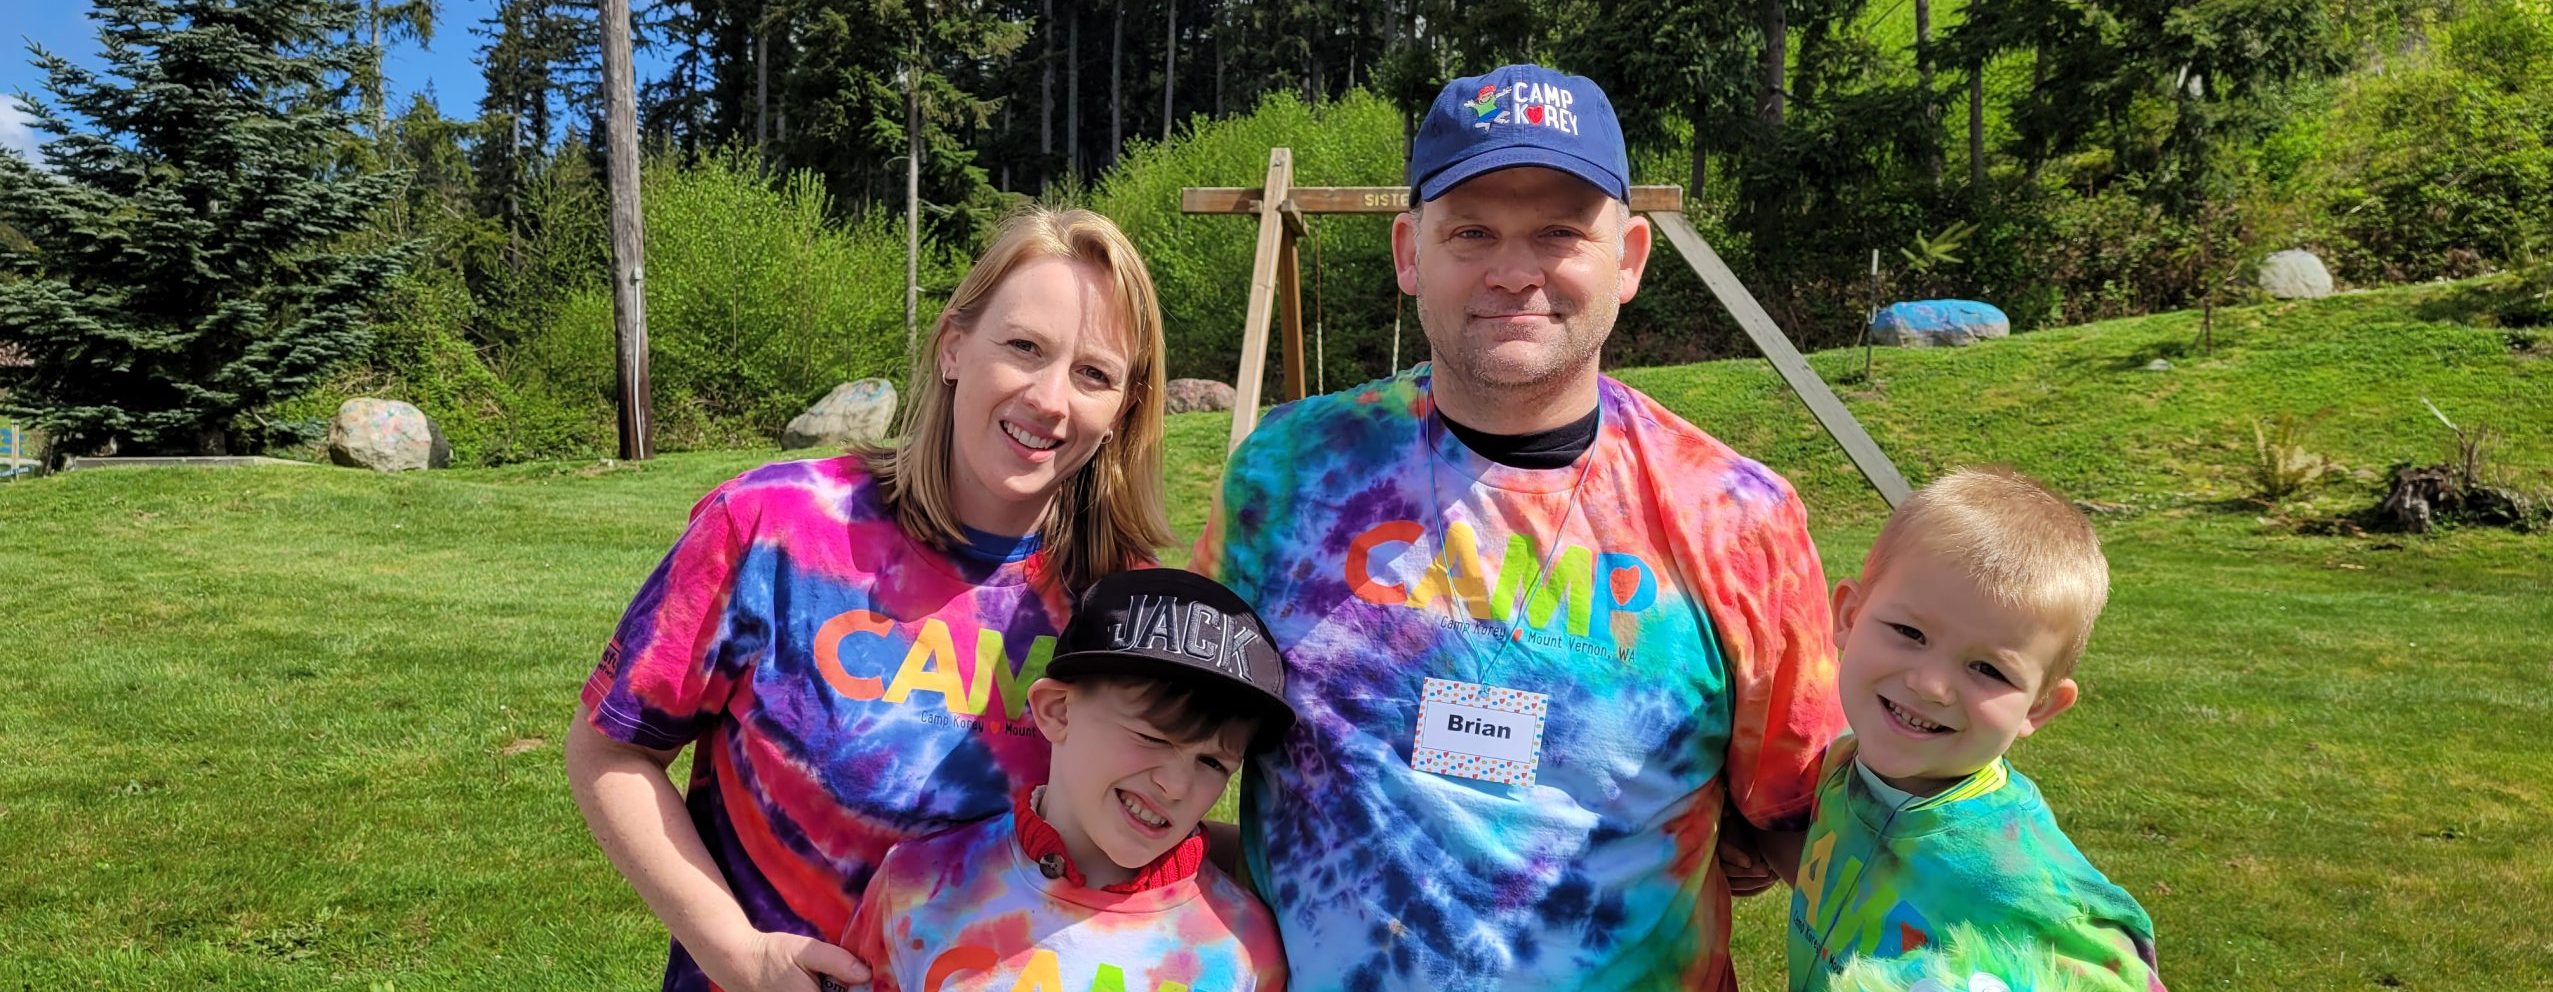 two campers stand with their parents wearing tie dye shirts they made at camp